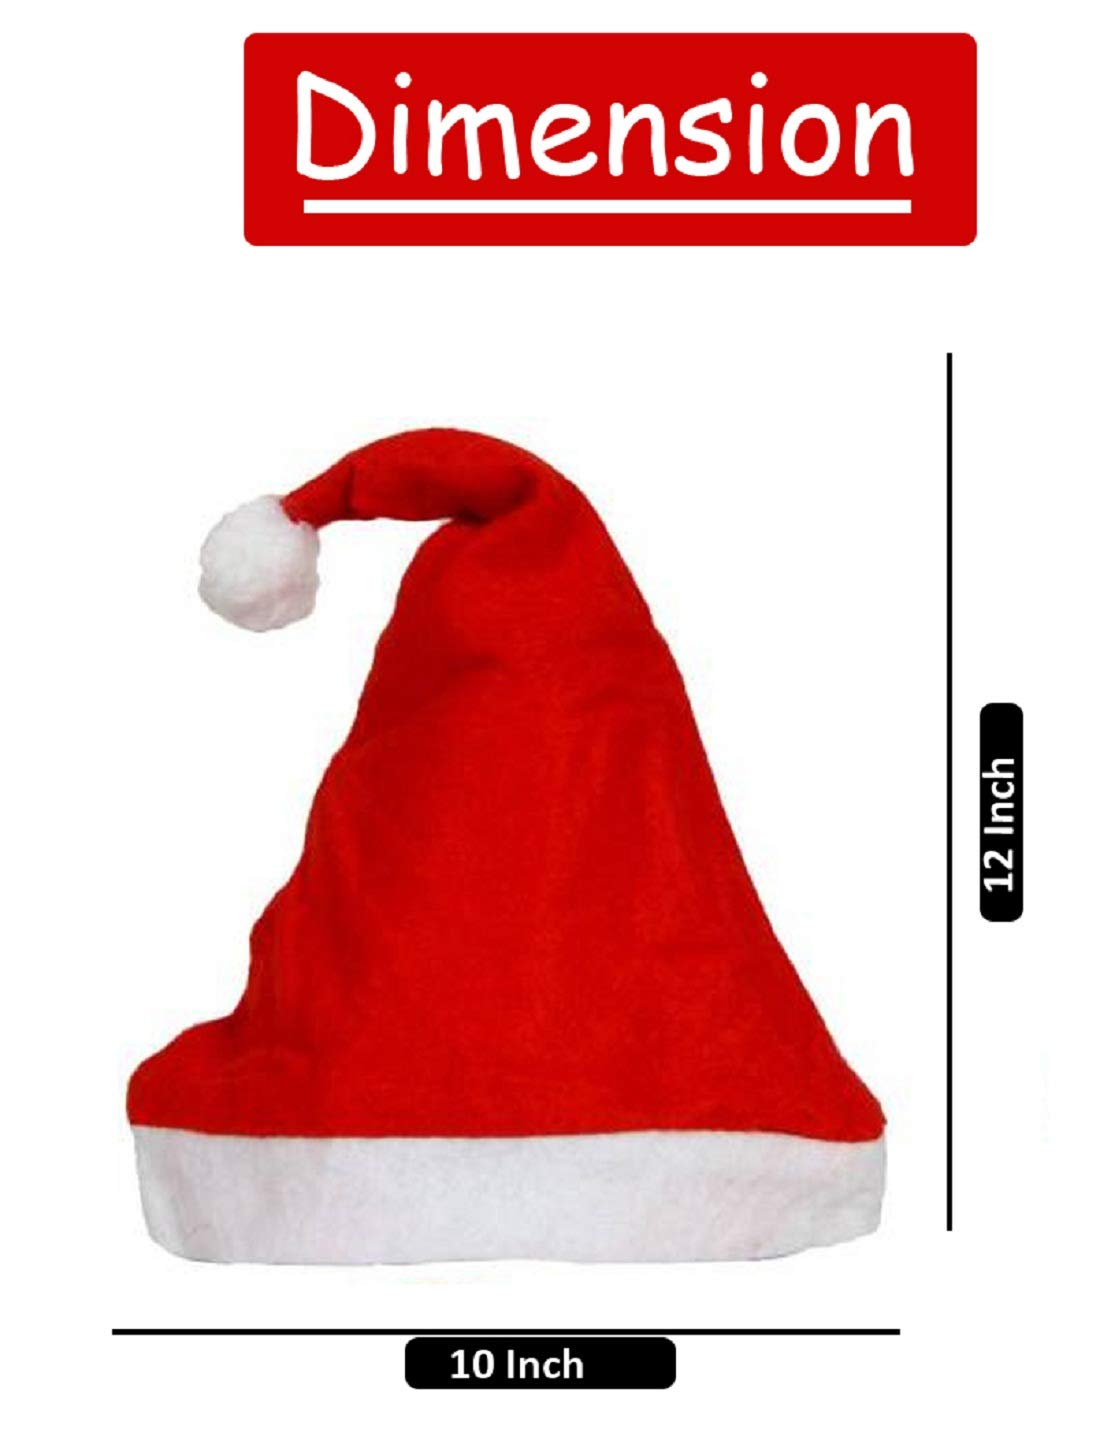 eCraftIndia Red and White Merry Christmas Hats, Santa Claus Caps for kids and Adults - Free Size XMAS Caps, Santa Claus Hats for Christmas, New Year, Festive Holiday Party (Set of 9) 7